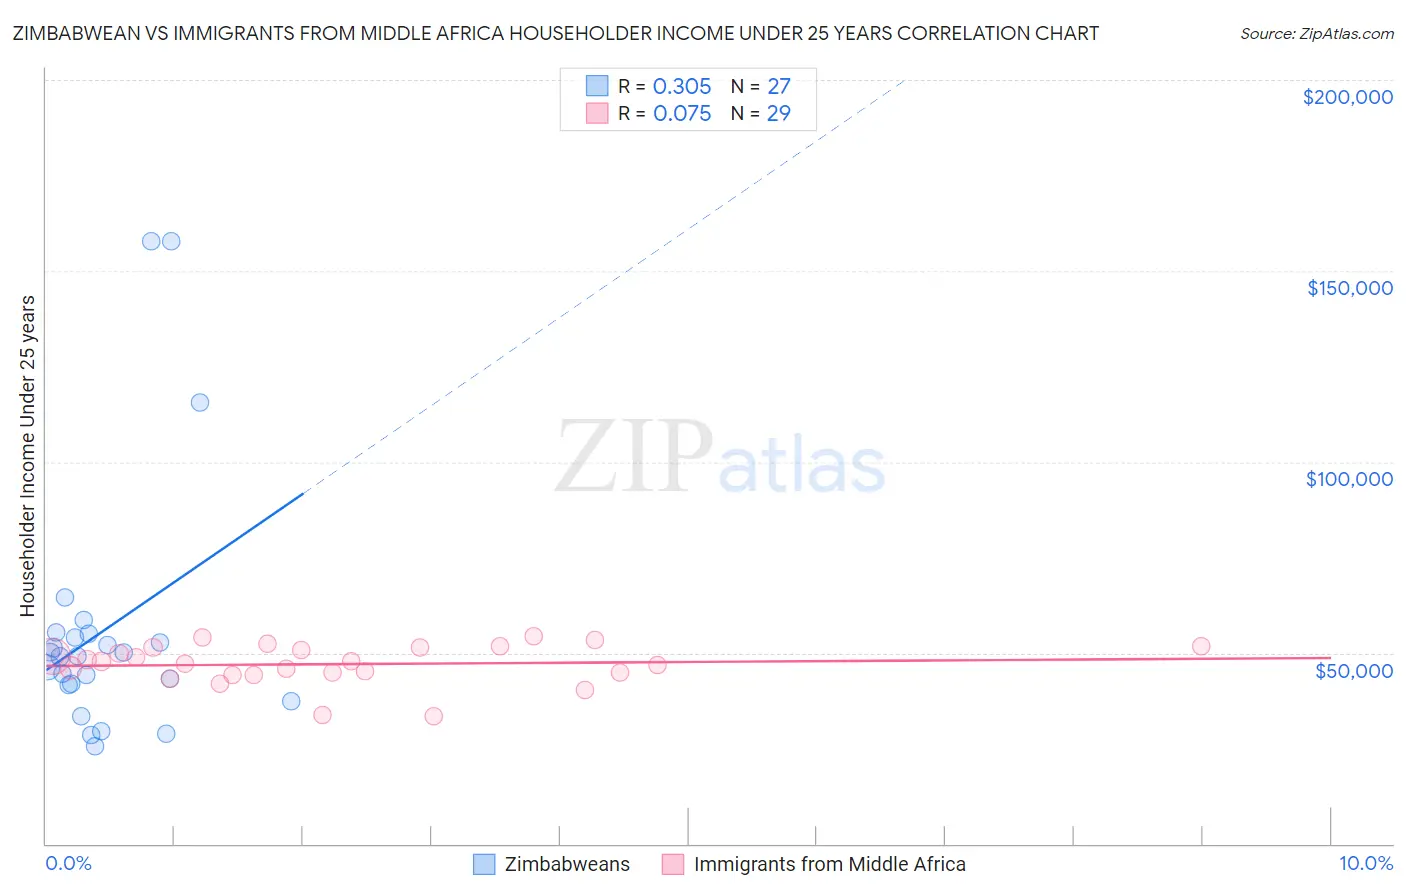 Zimbabwean vs Immigrants from Middle Africa Householder Income Under 25 years